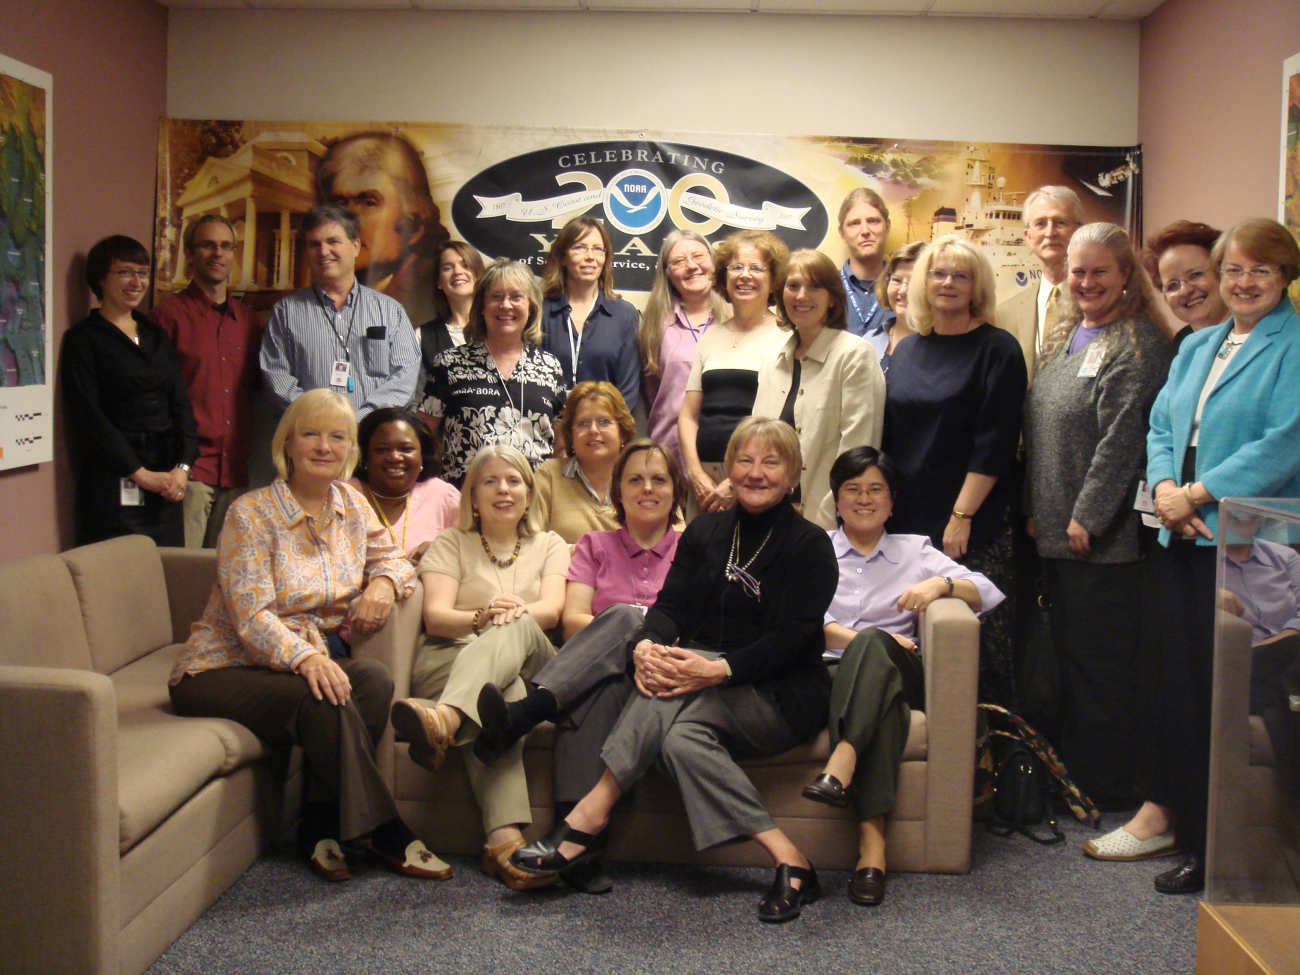 NOAA librarians take time out from the books to send greetings from the AnnualNOAA Libraries Conference